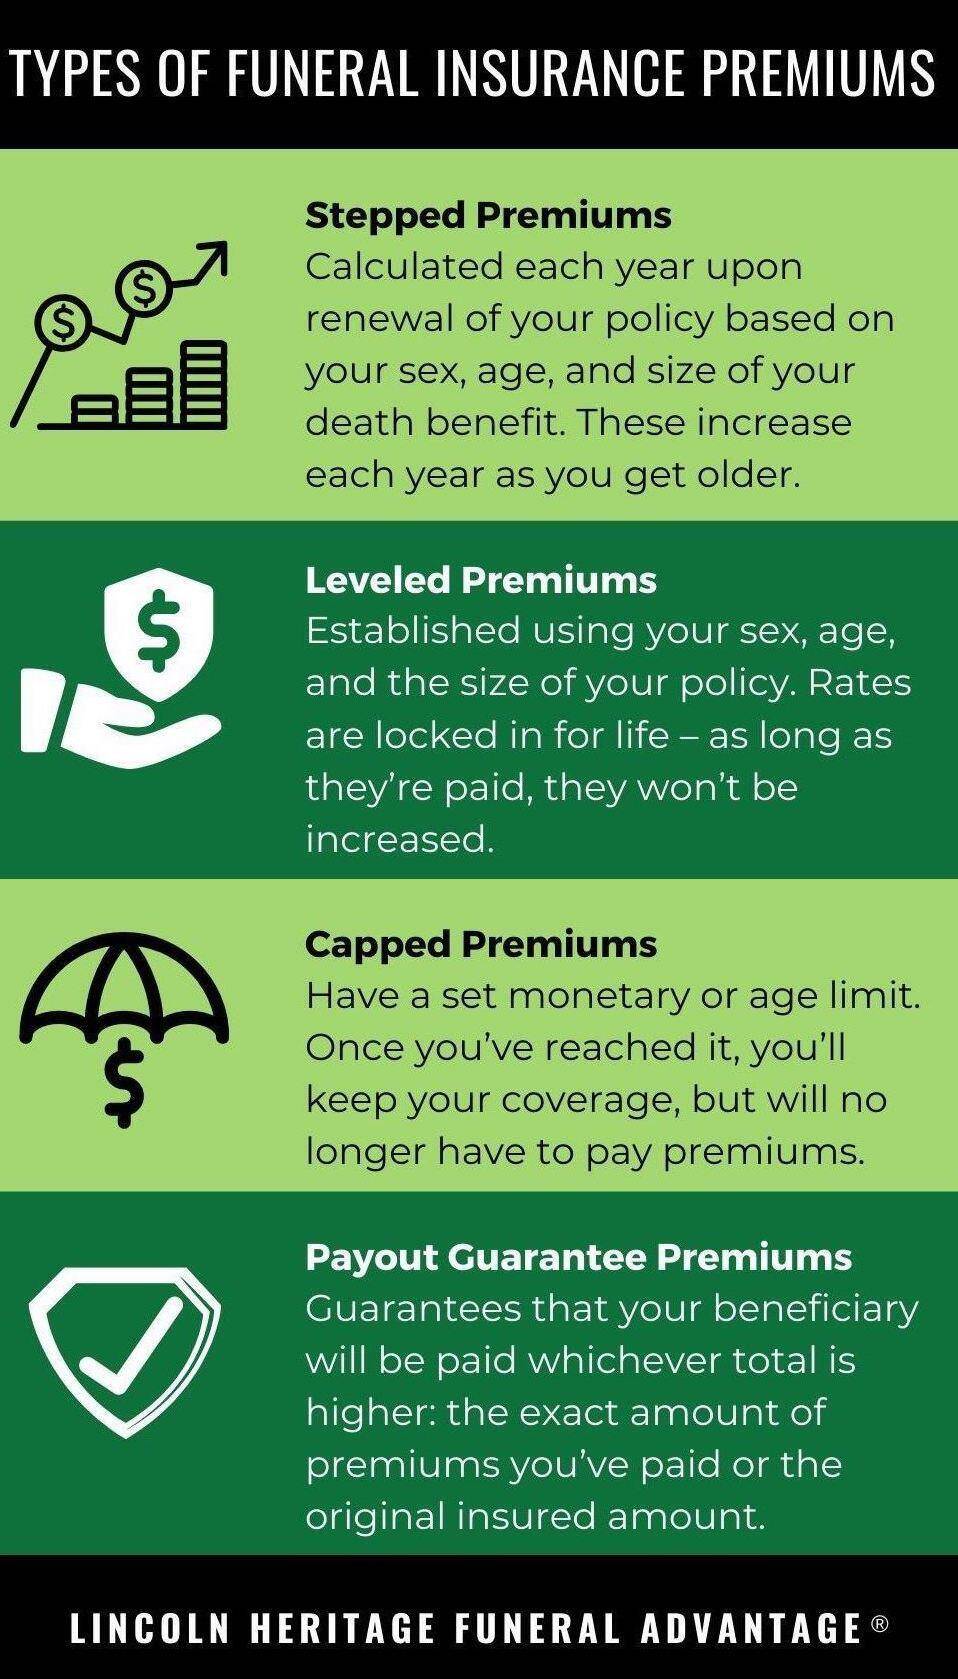 Learn about the types of funeral insurance premiums, including stepped, leveld, capped, and payout guarantee.